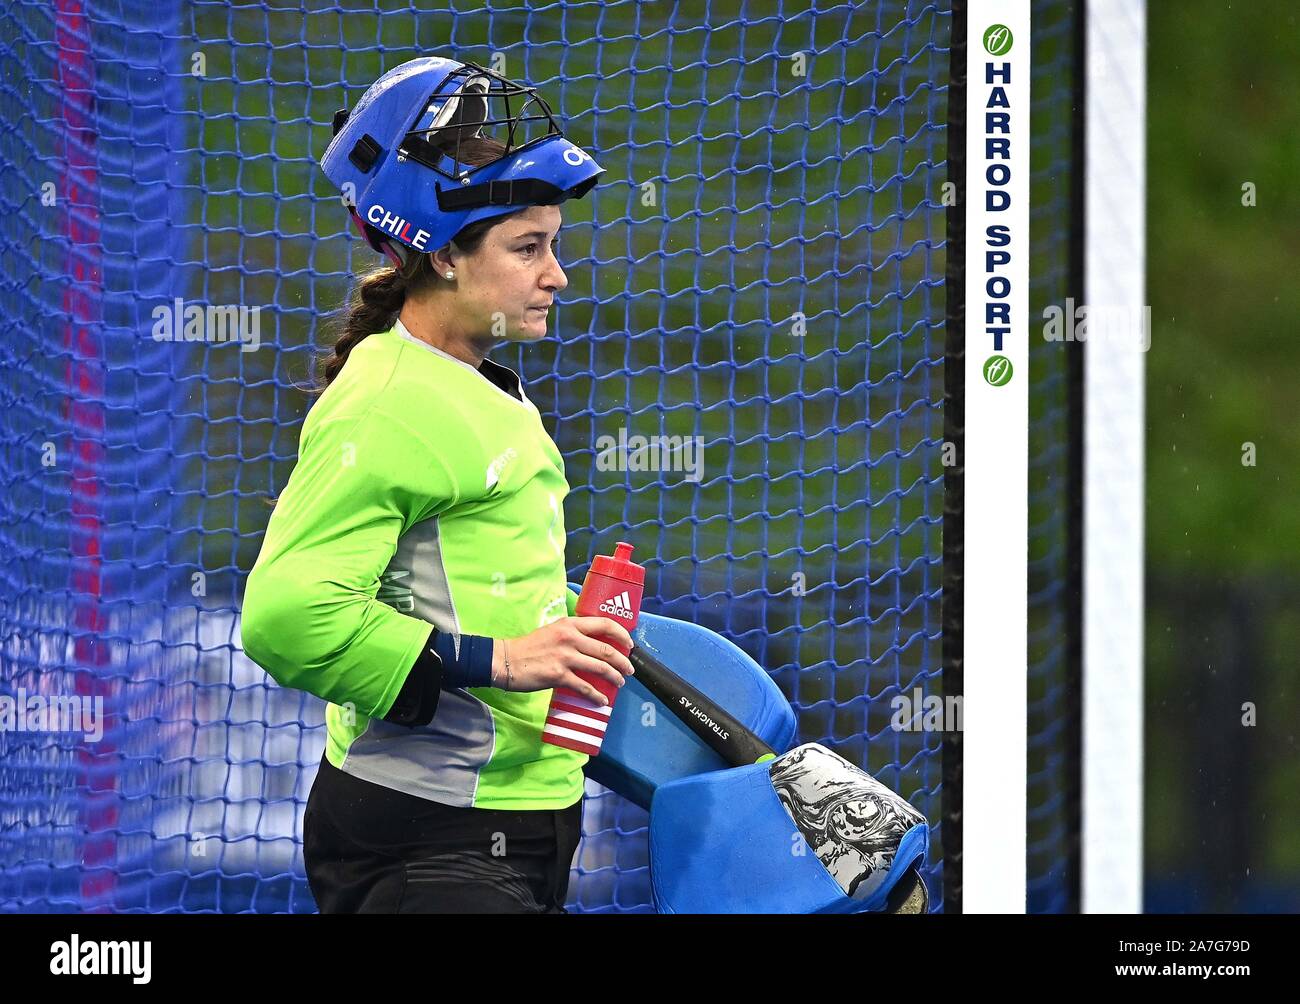 Stratford. United Kingdom. 02 November 2019. Claudia Schuler (Chile, goalkeeper). Great Britain v Chile. FIH Womens Olympic hockey qualifier. Lee Valley hockey and tennis centre. Stratford. London. United Kingdom. Credit Garry Bowden/Sport in Pictures. Credit: Sport In Pictures/Alamy Live News Stock Photo